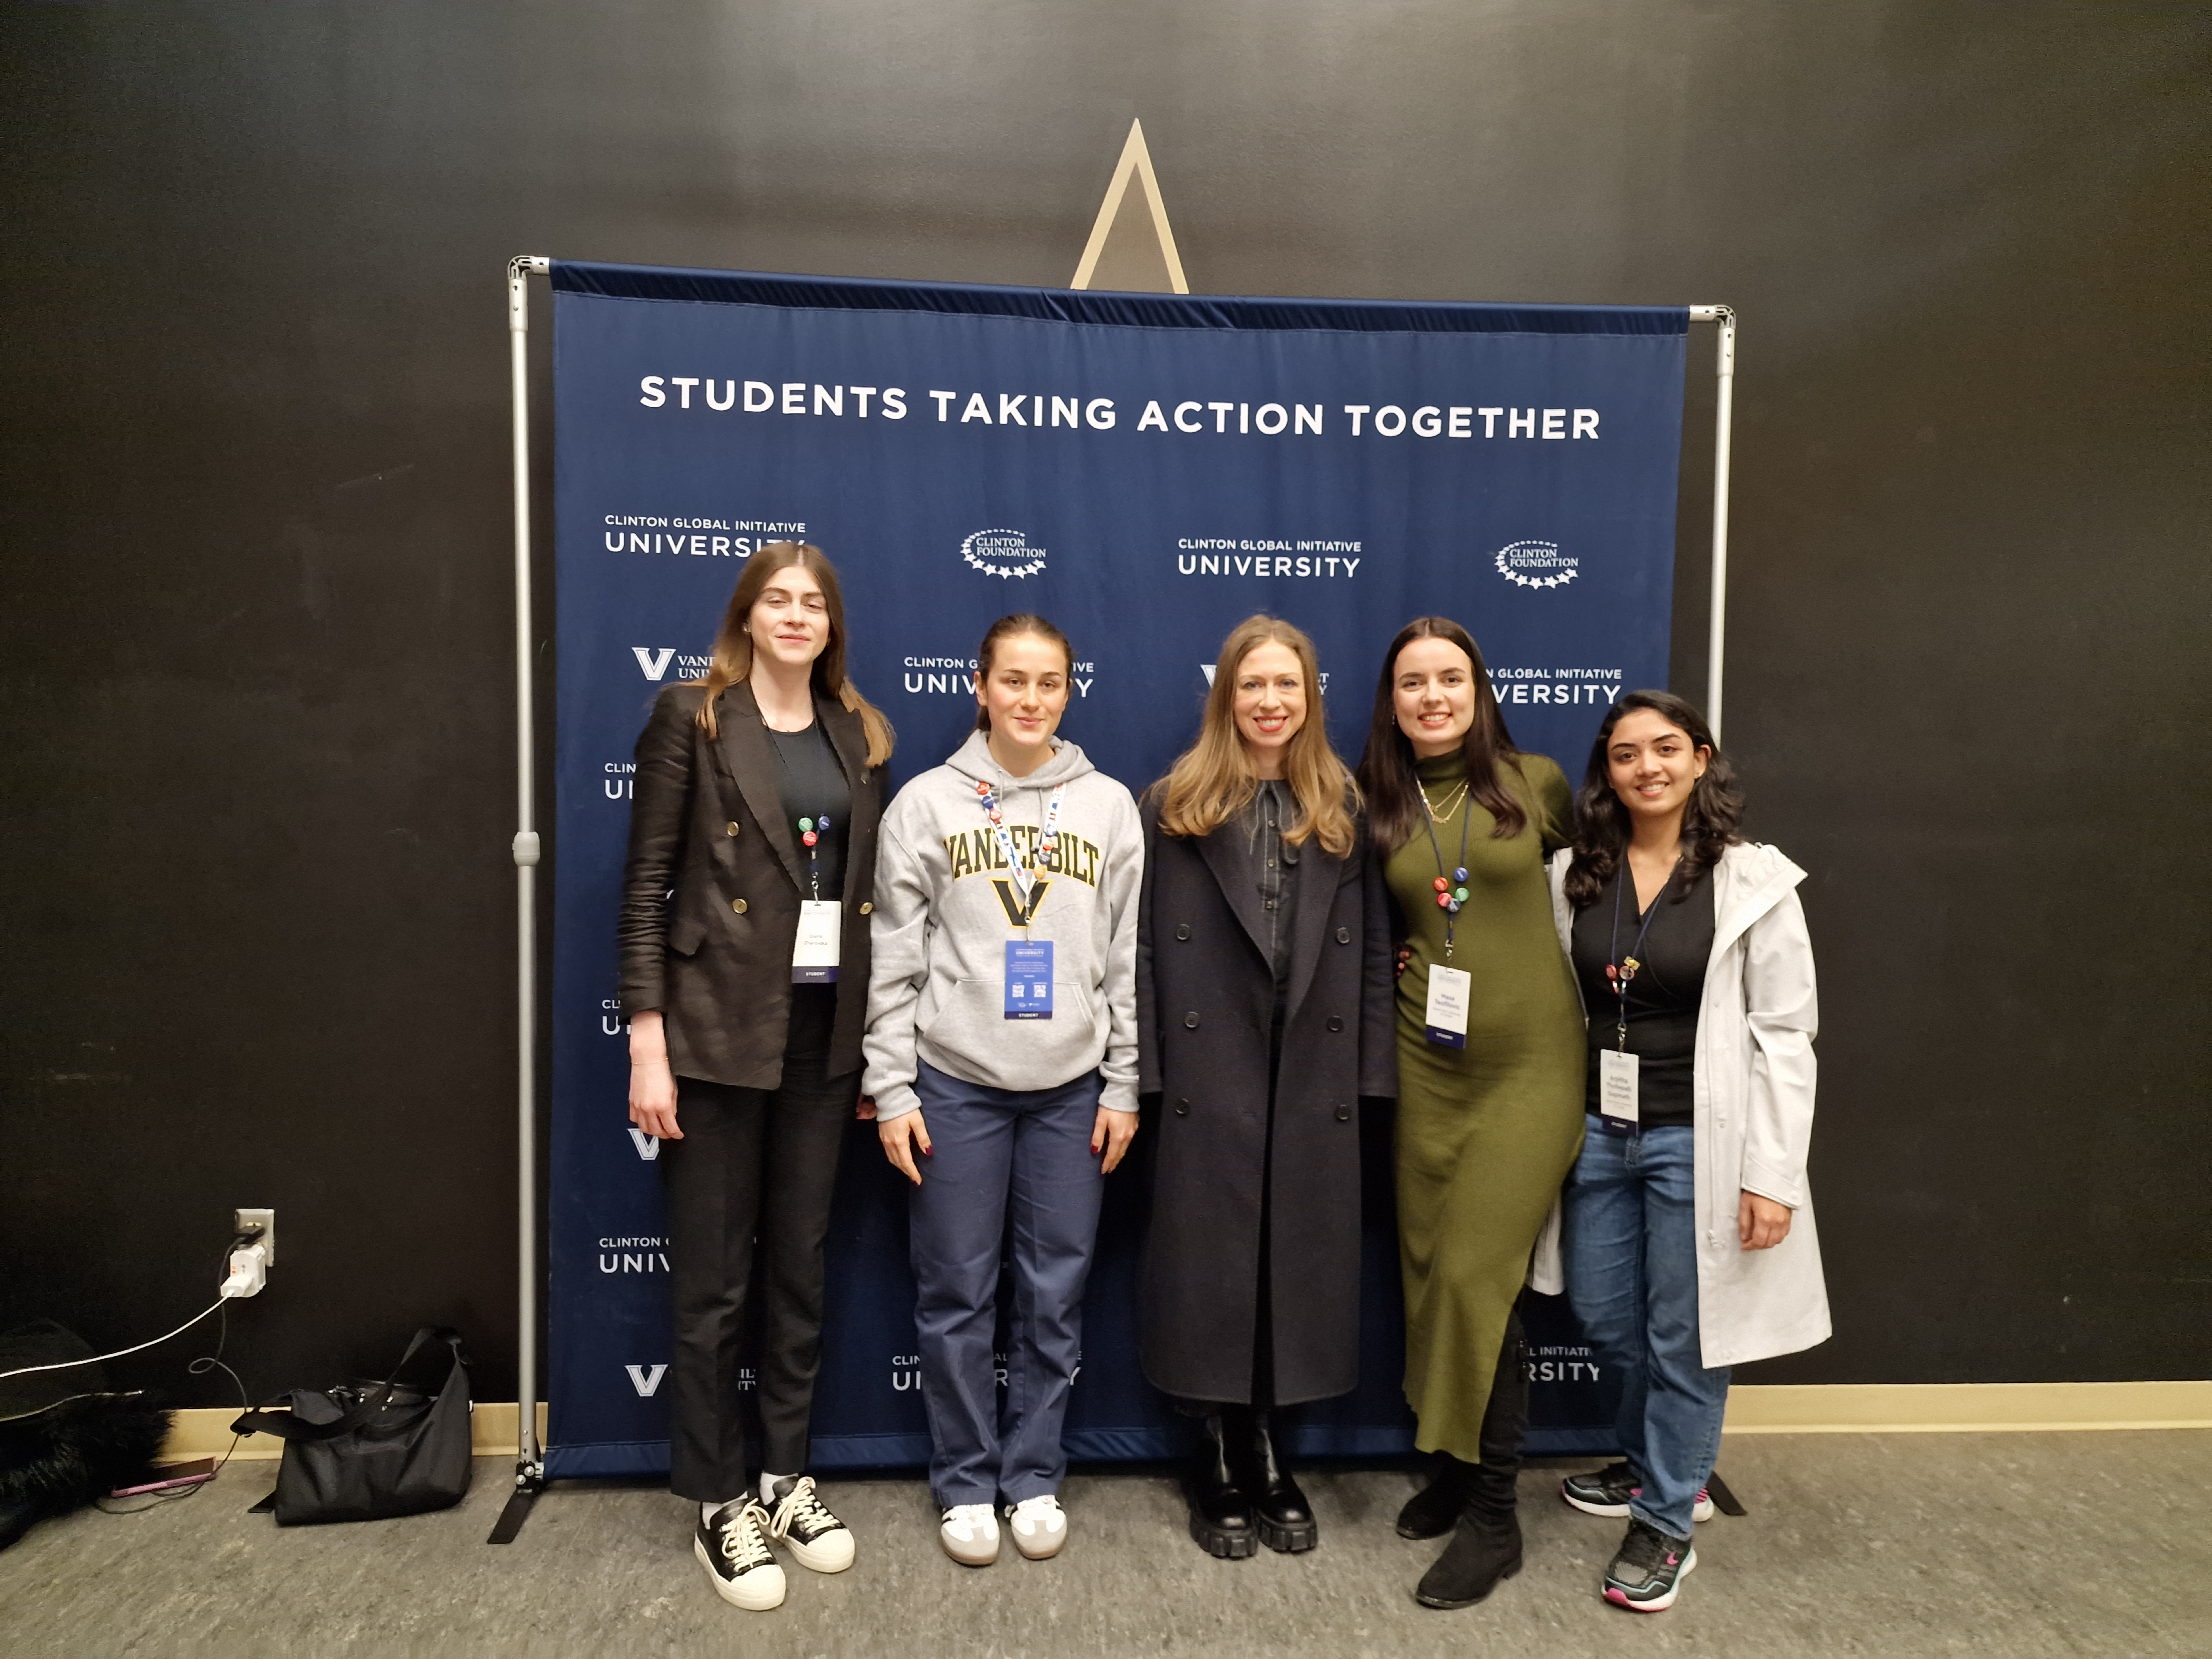 Students with Chelsea Clinton